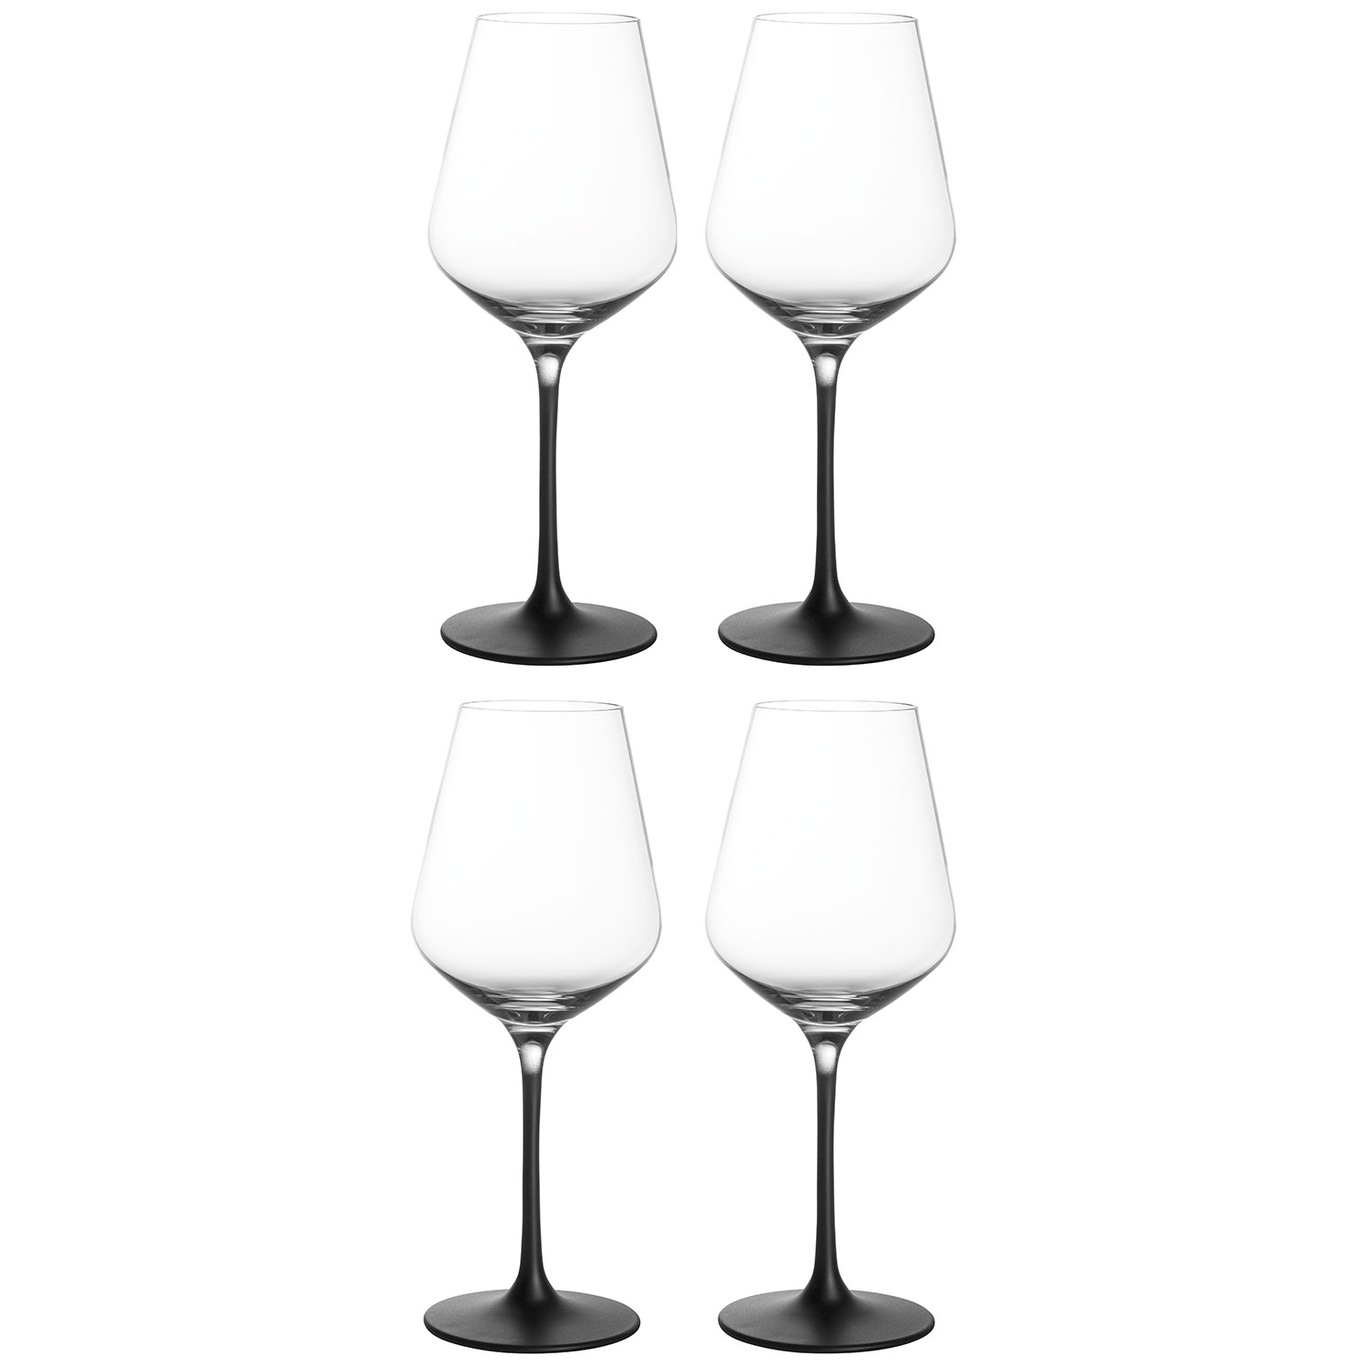 Manufacture Rock White Wine Glass 38 cl 4-pack, Black